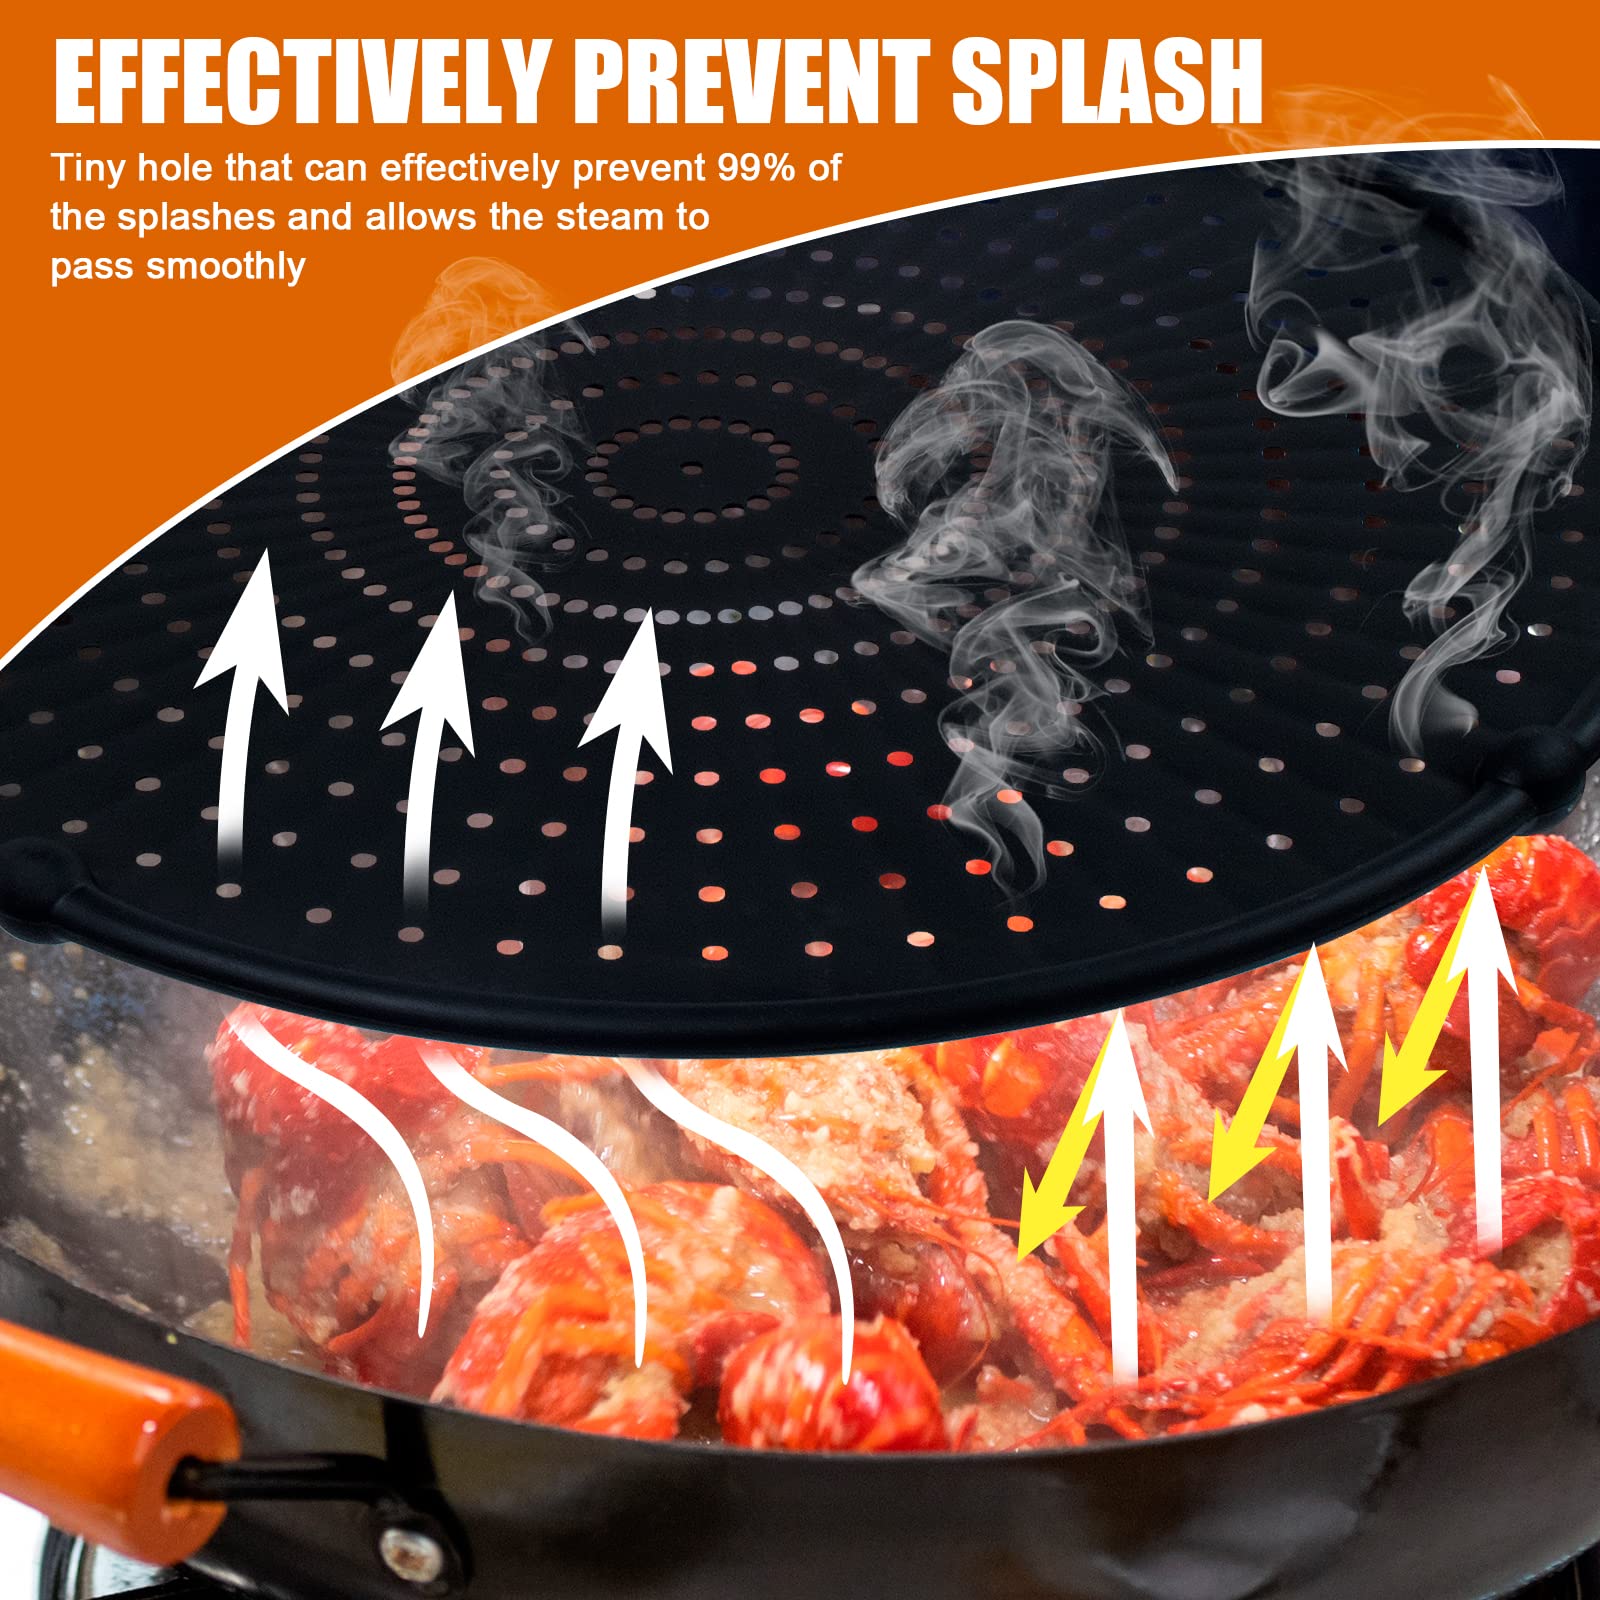 Silicone Splatter Screen for Frying Pan 13”, Foldable Grease Splatter Guard Heat Resistant Oil Splash Guard - Stop Hot Oil Splatter, Pan Strainer, Pan Cover, Non Stick, Multi-Use, Black